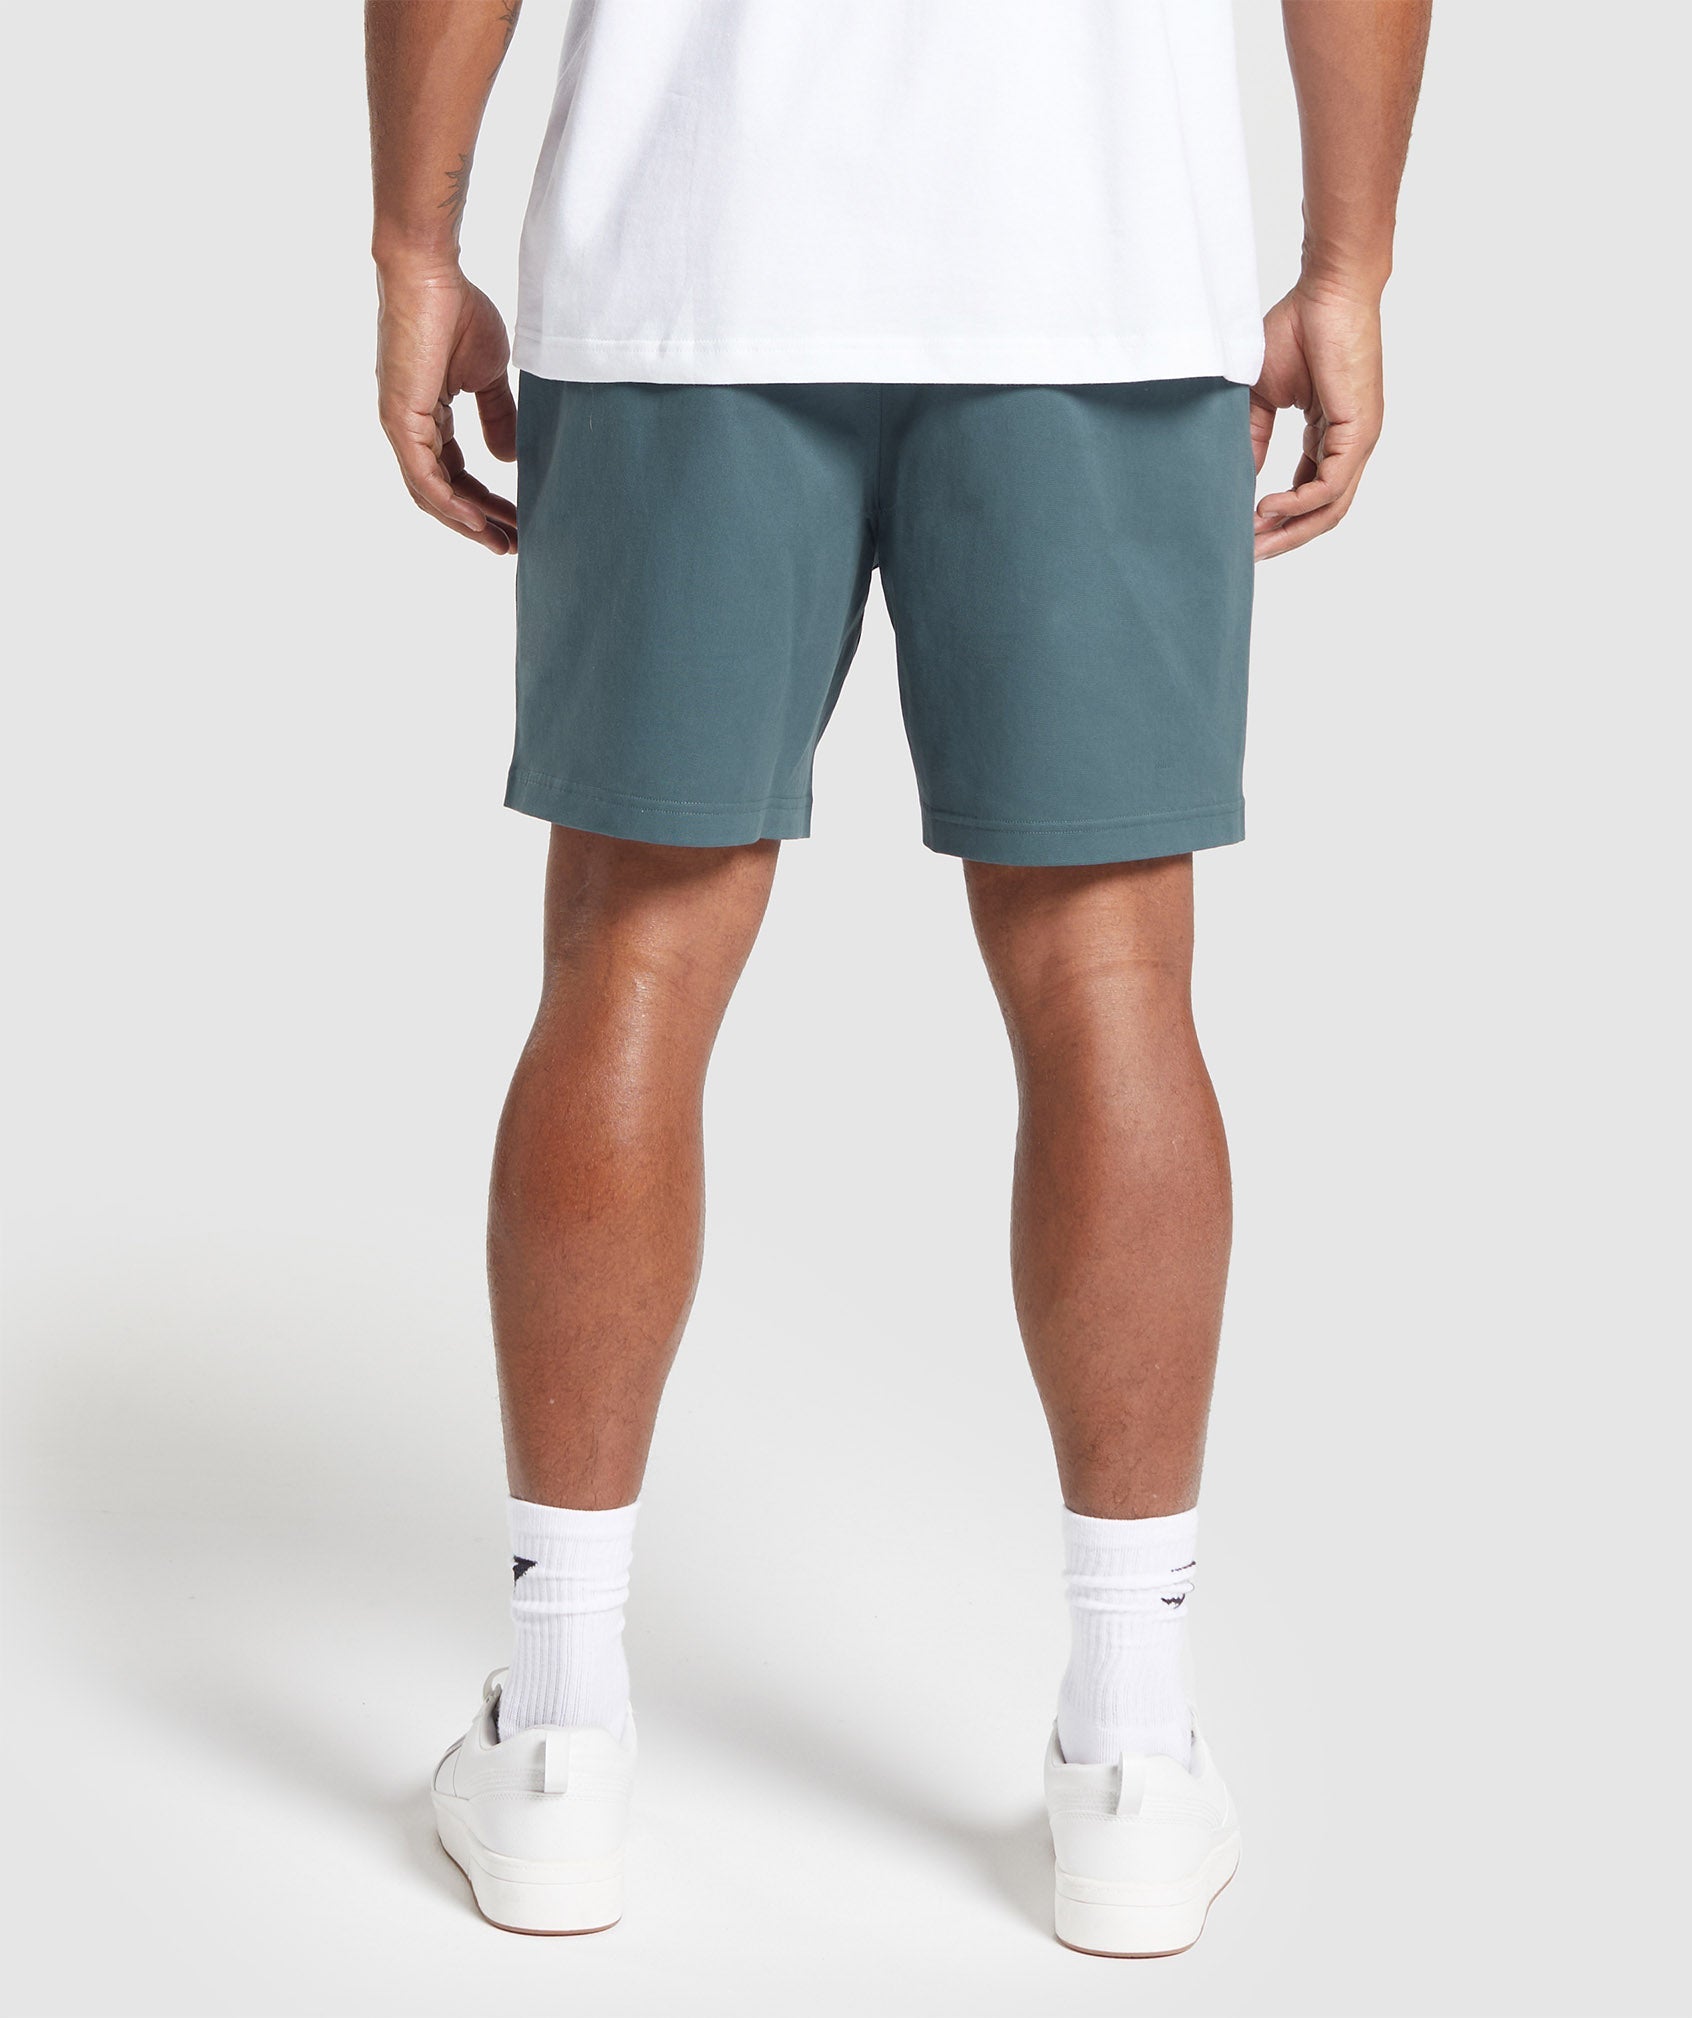 Rest Day Woven Shorts in Smokey Teal - view 2